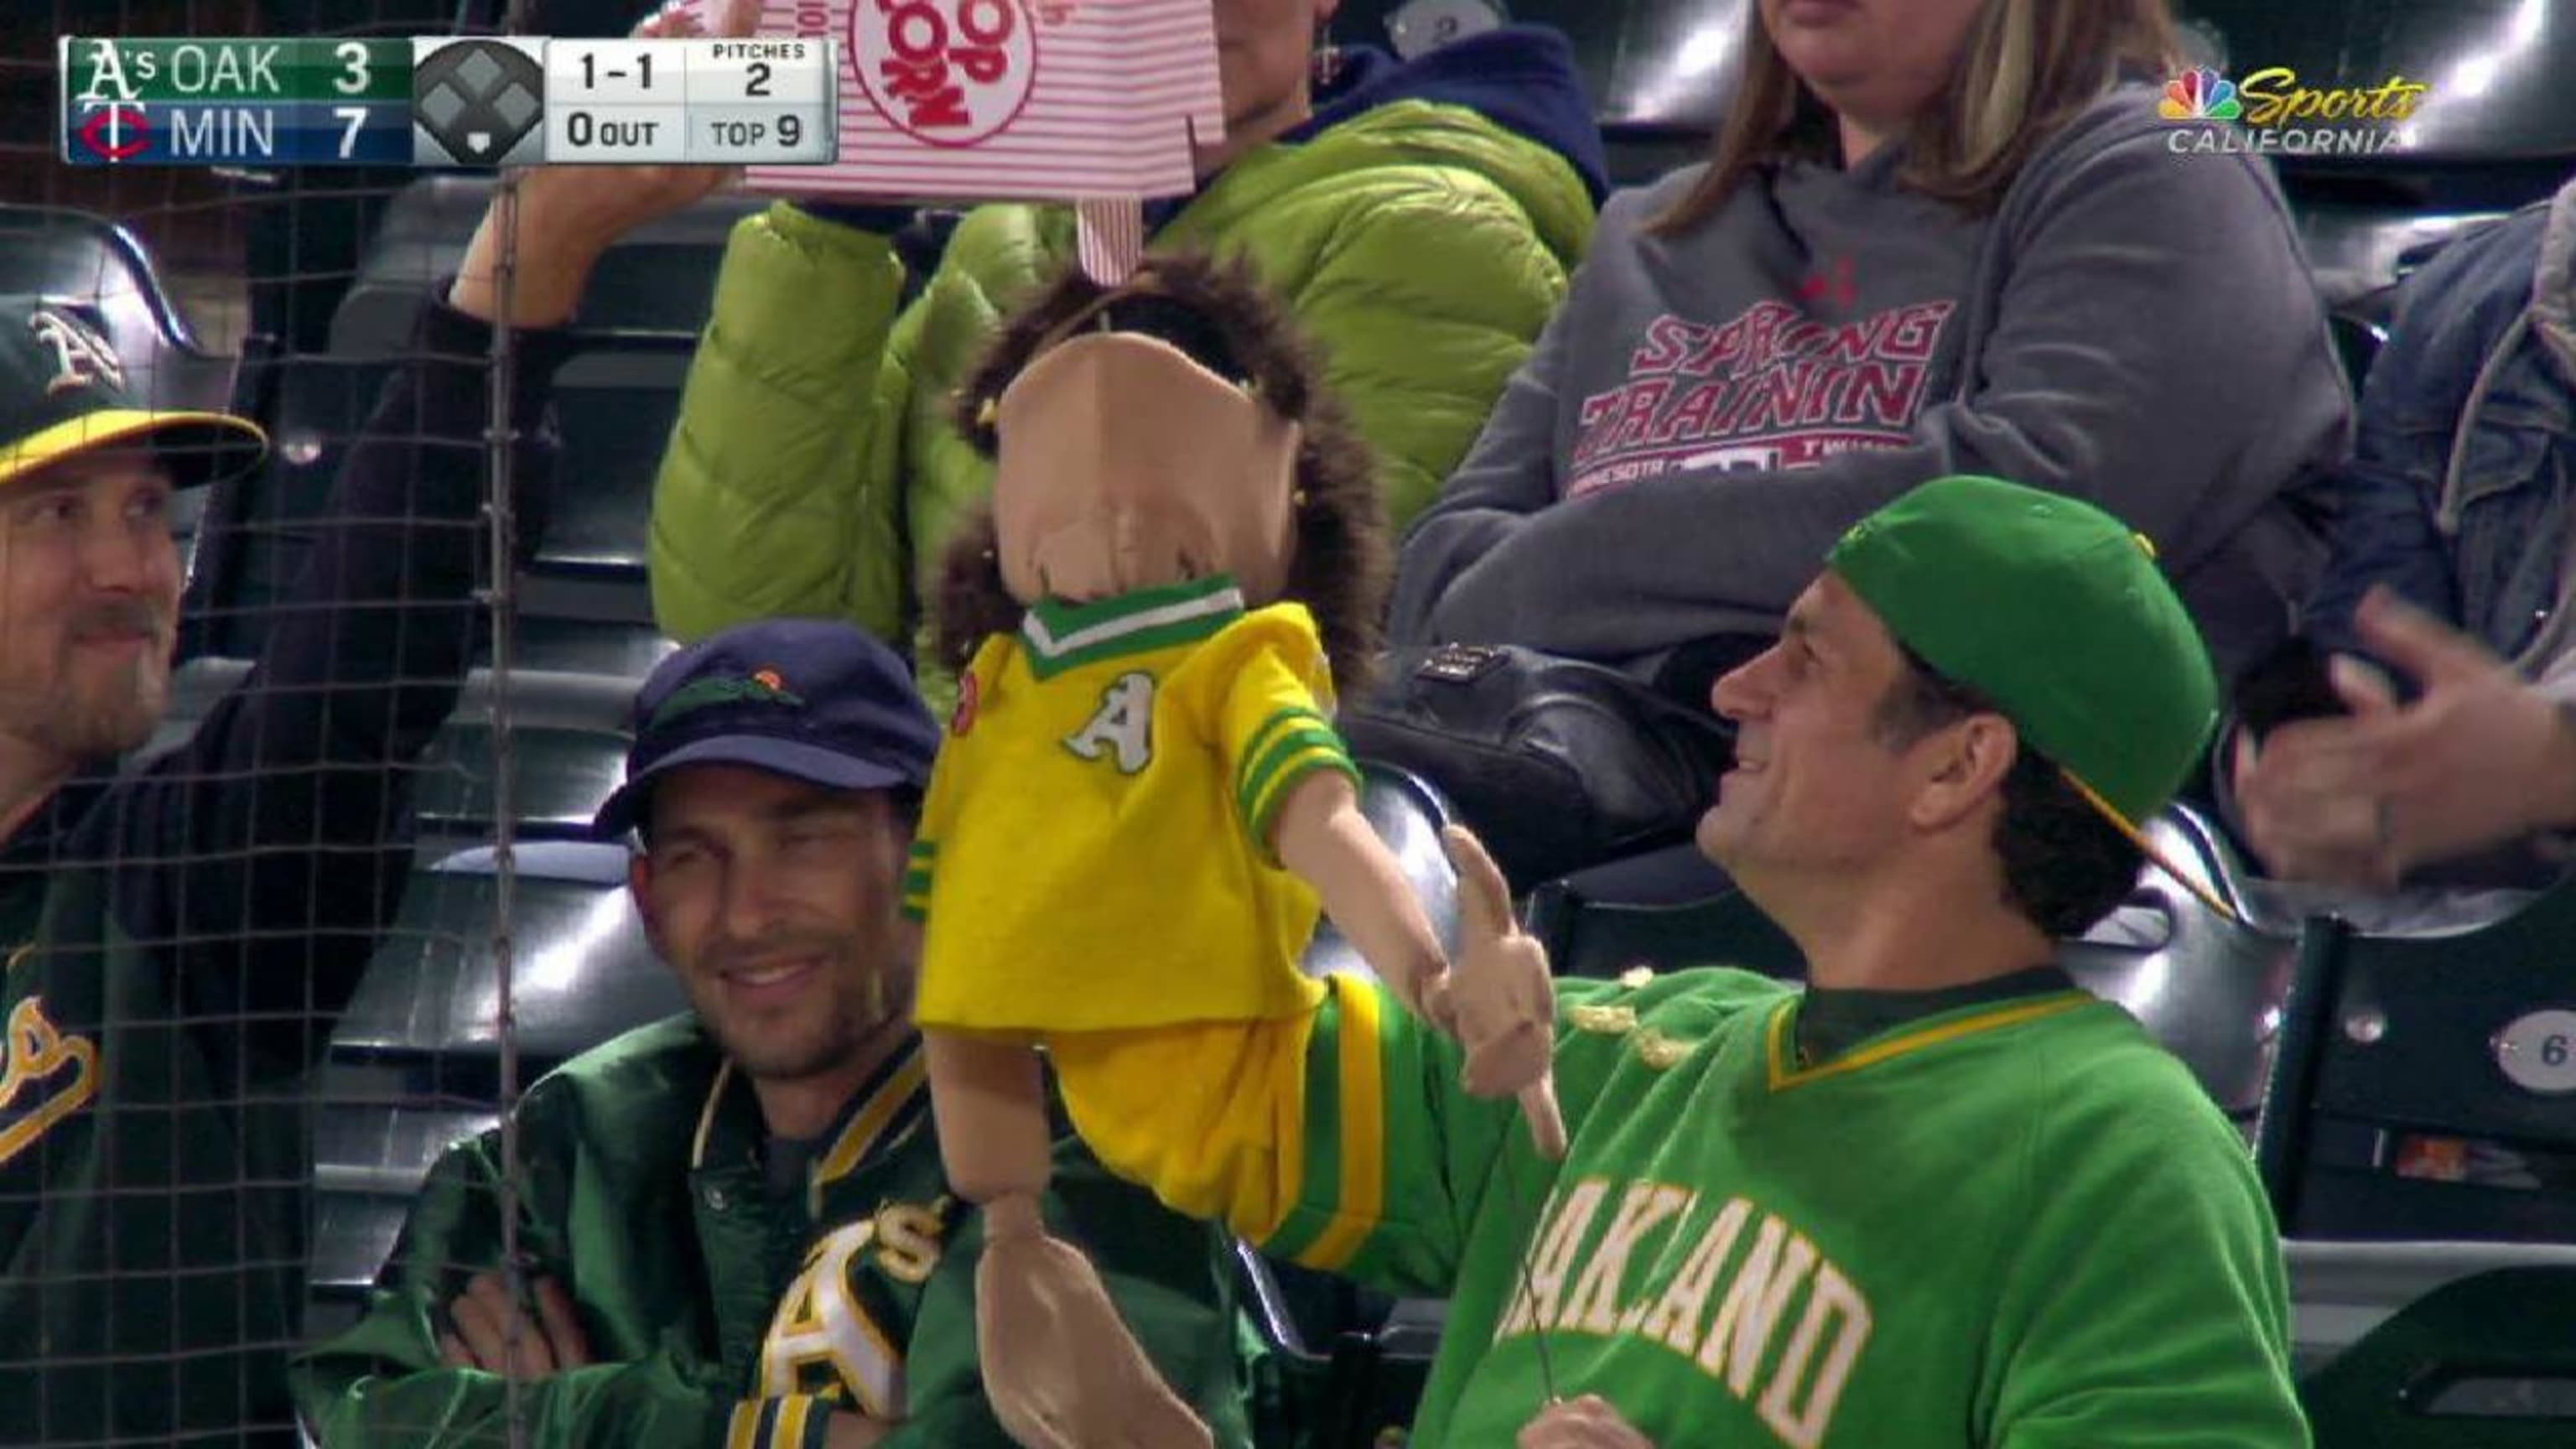 A's fan has fun with puppet in the stands 